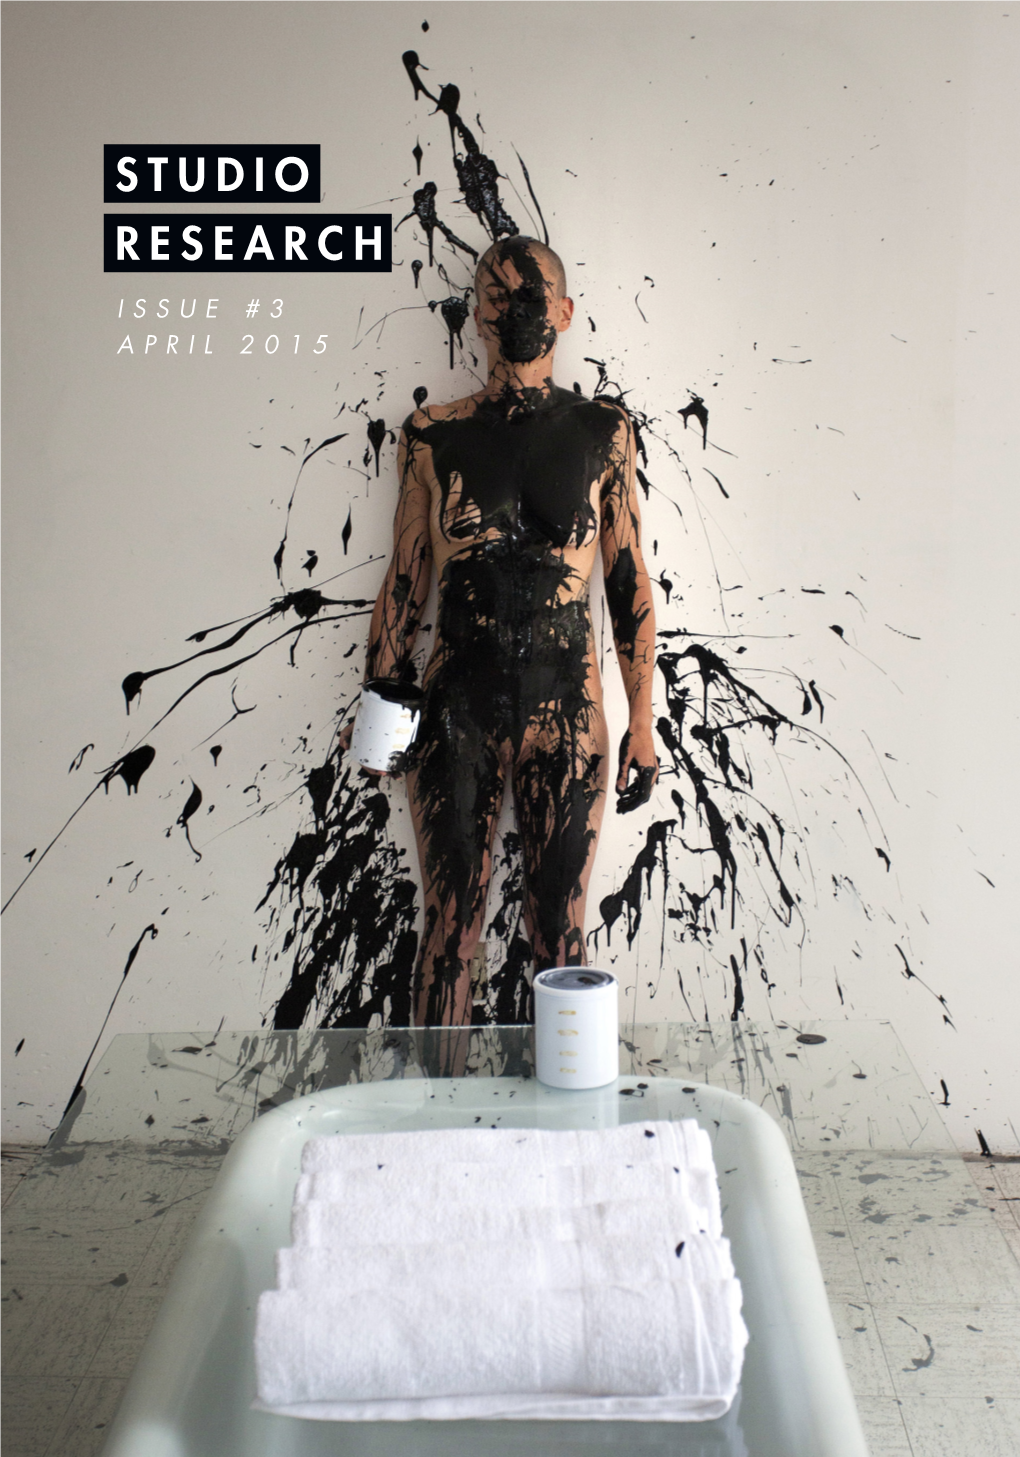 Download Studio Research Issue #3